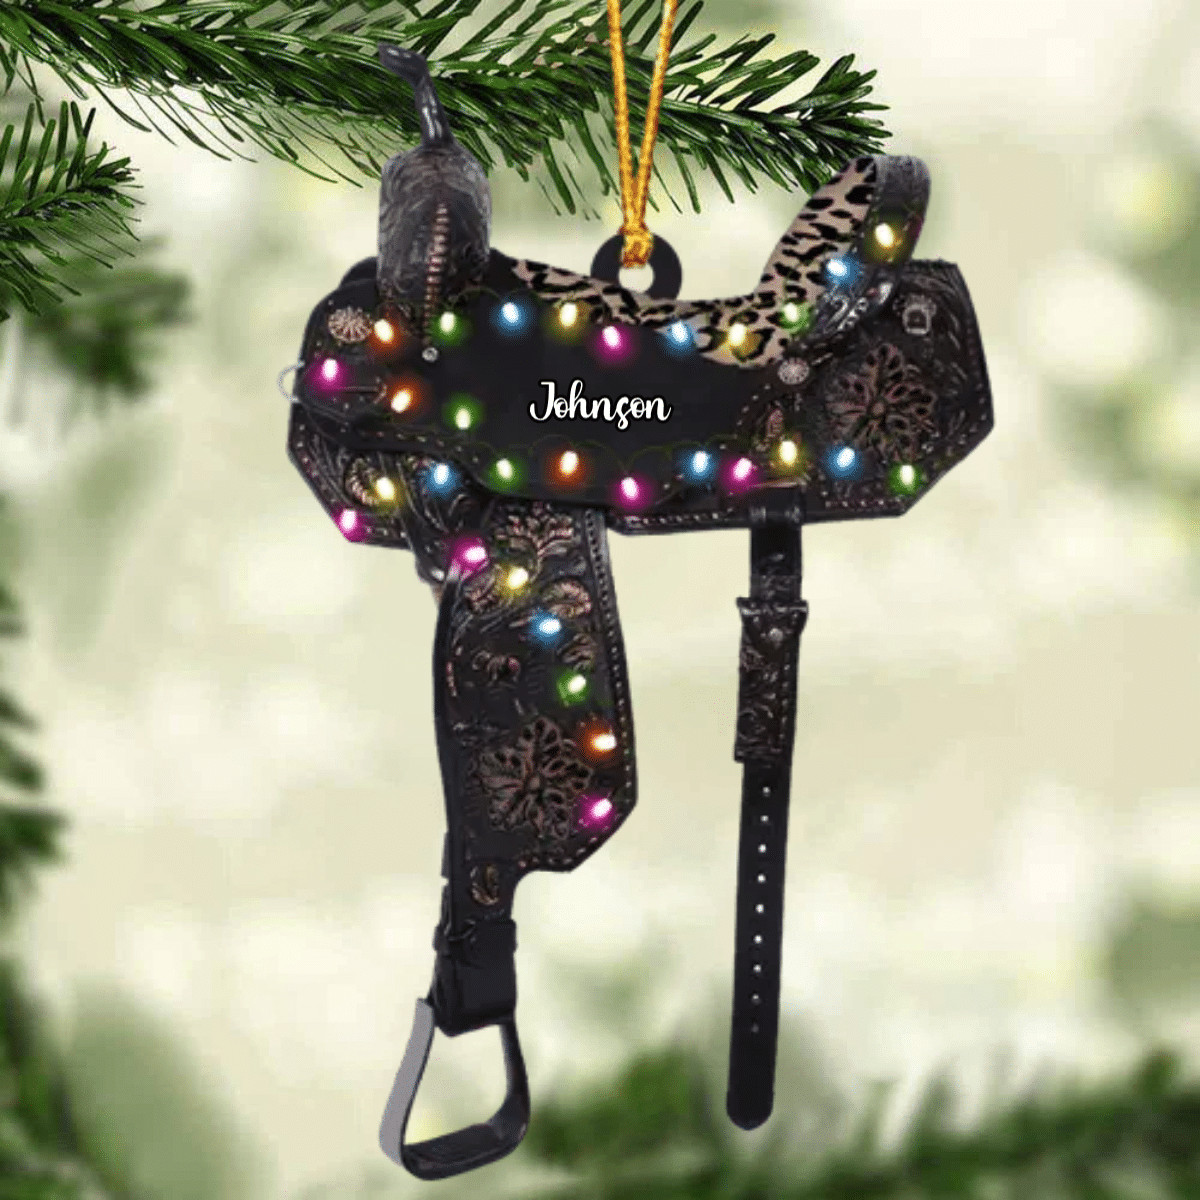 Personalized Horse Saddle For Horse Lovers Riding Horse Ornament Flat Acrylic Horse Ornament